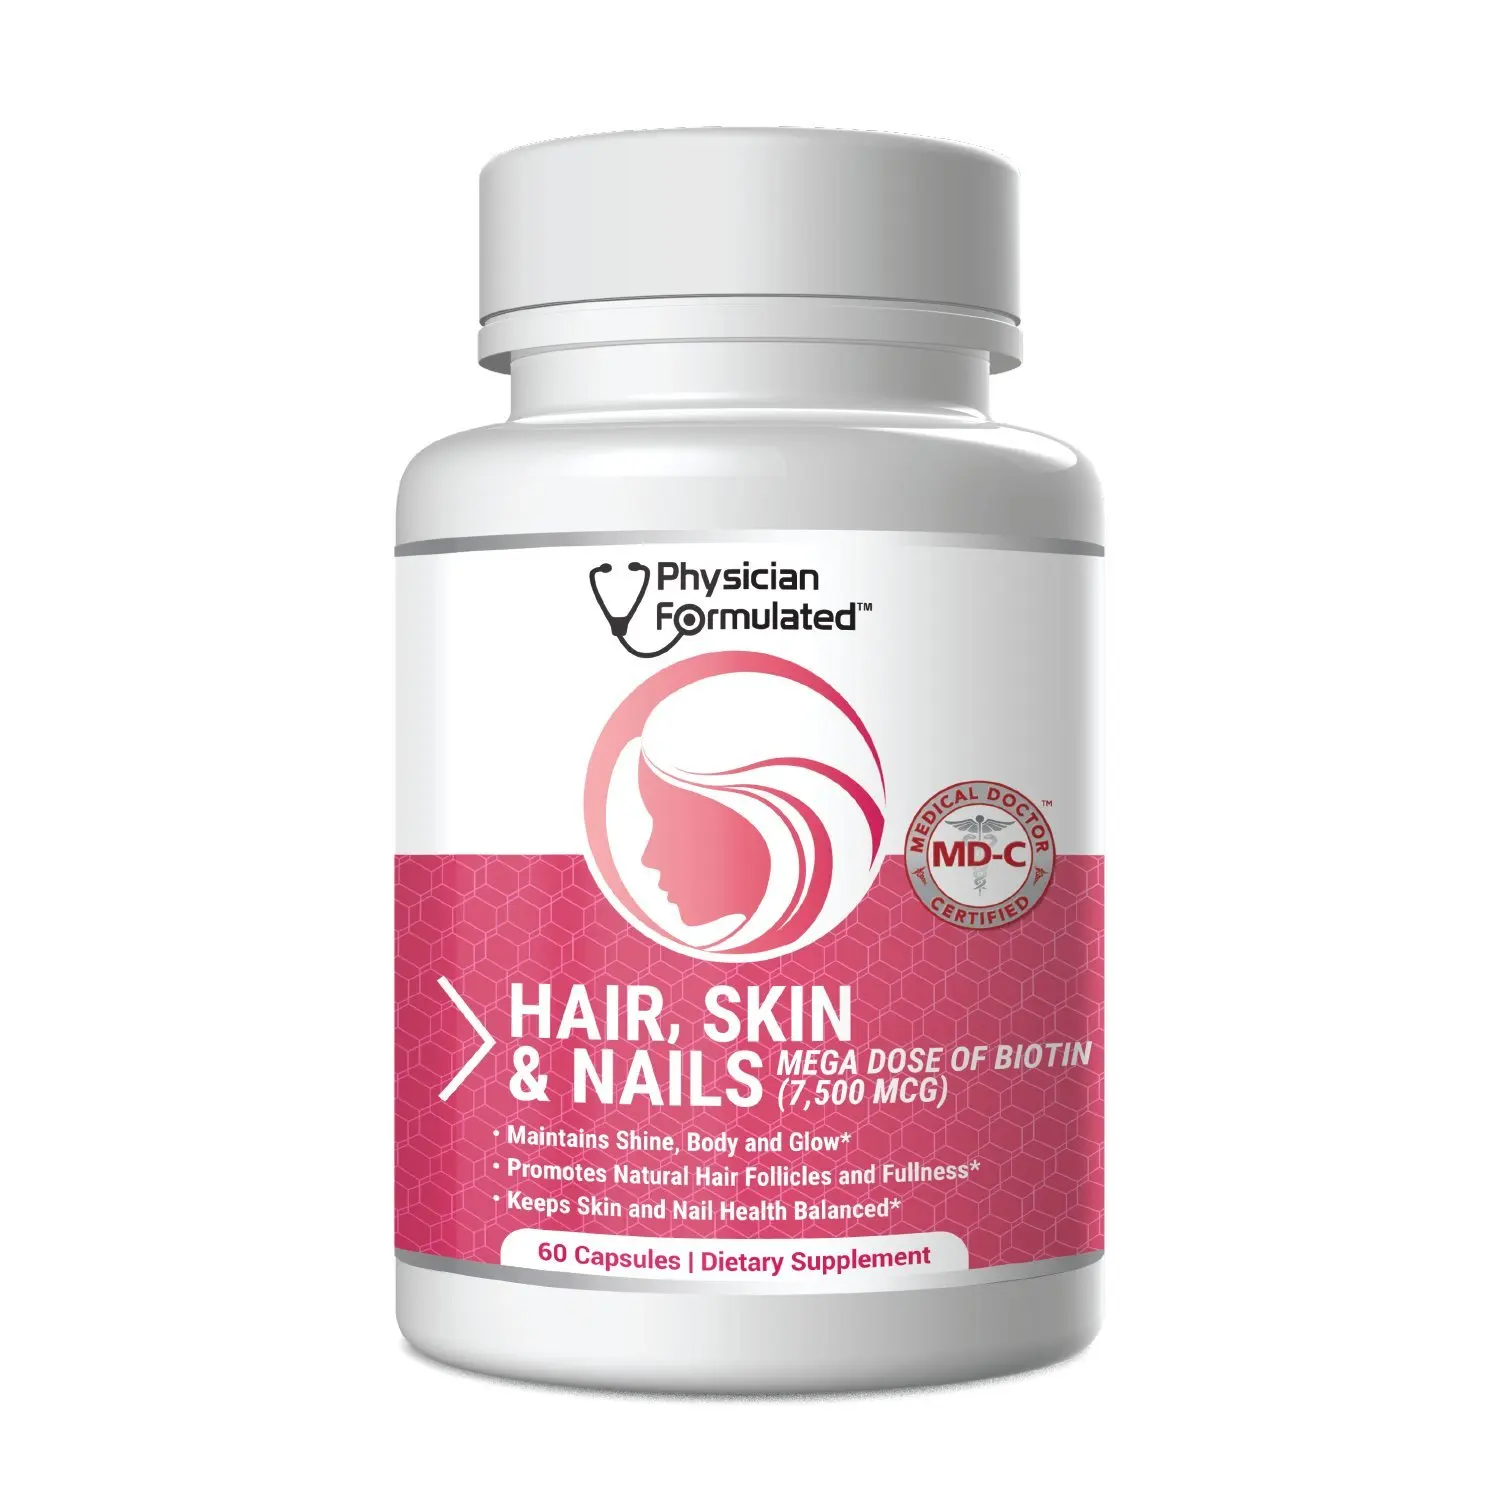 Physician Formulated Healthy Hair Skin and Nails Vitamins for Men & Wom...